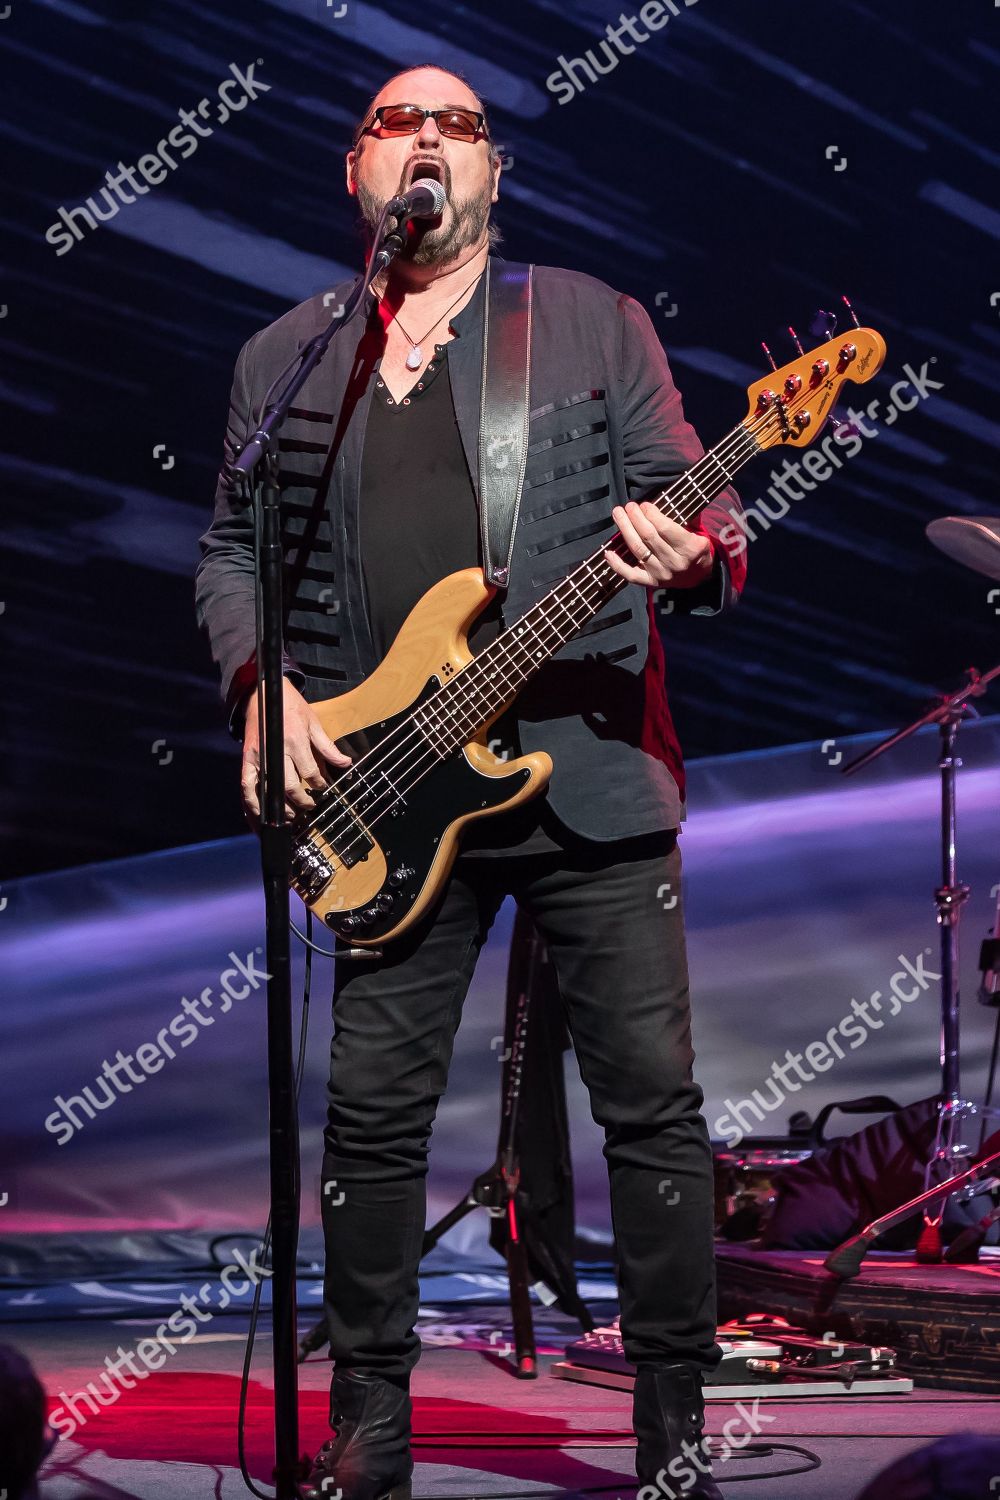 Kenny Lee Lewis Steve Miller Band Editorial Stock Photo - Stock Image |  Shutterstock